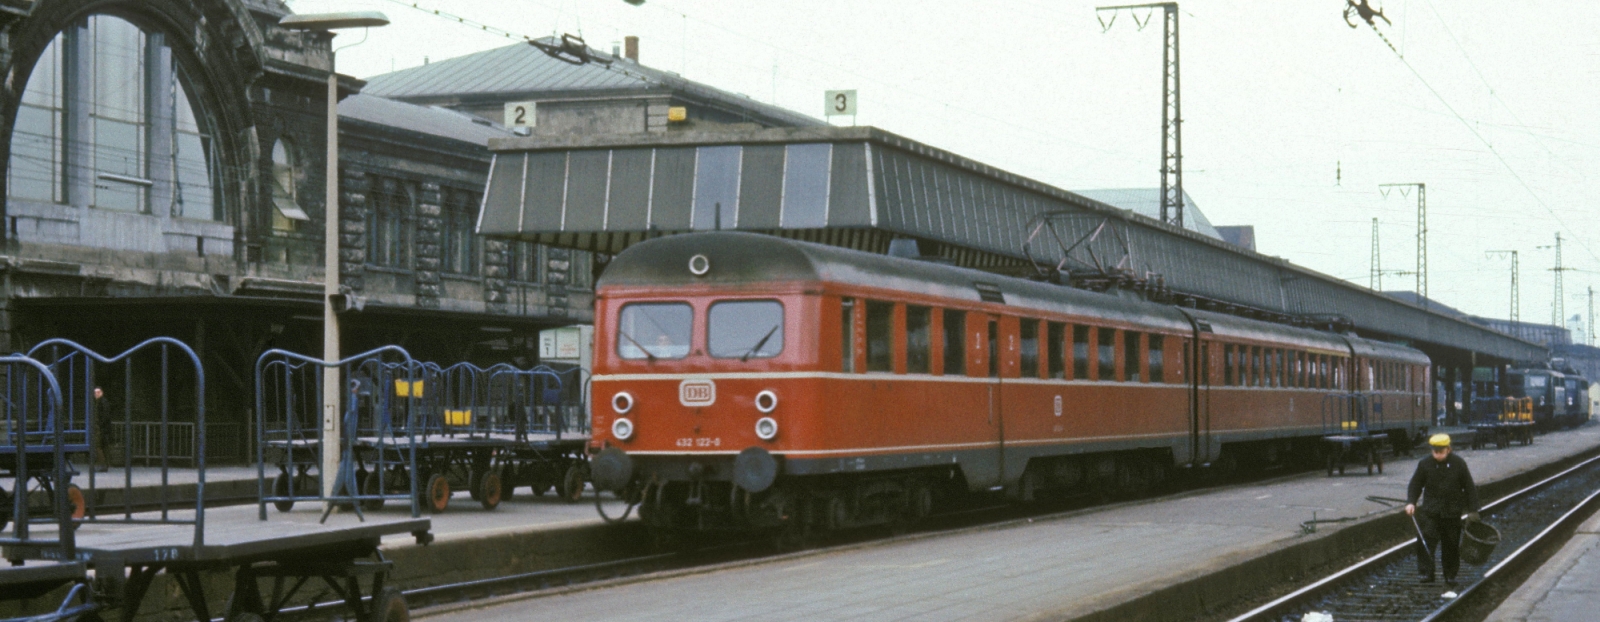 432 122 with new head shape in April 1975 in Nuremberg